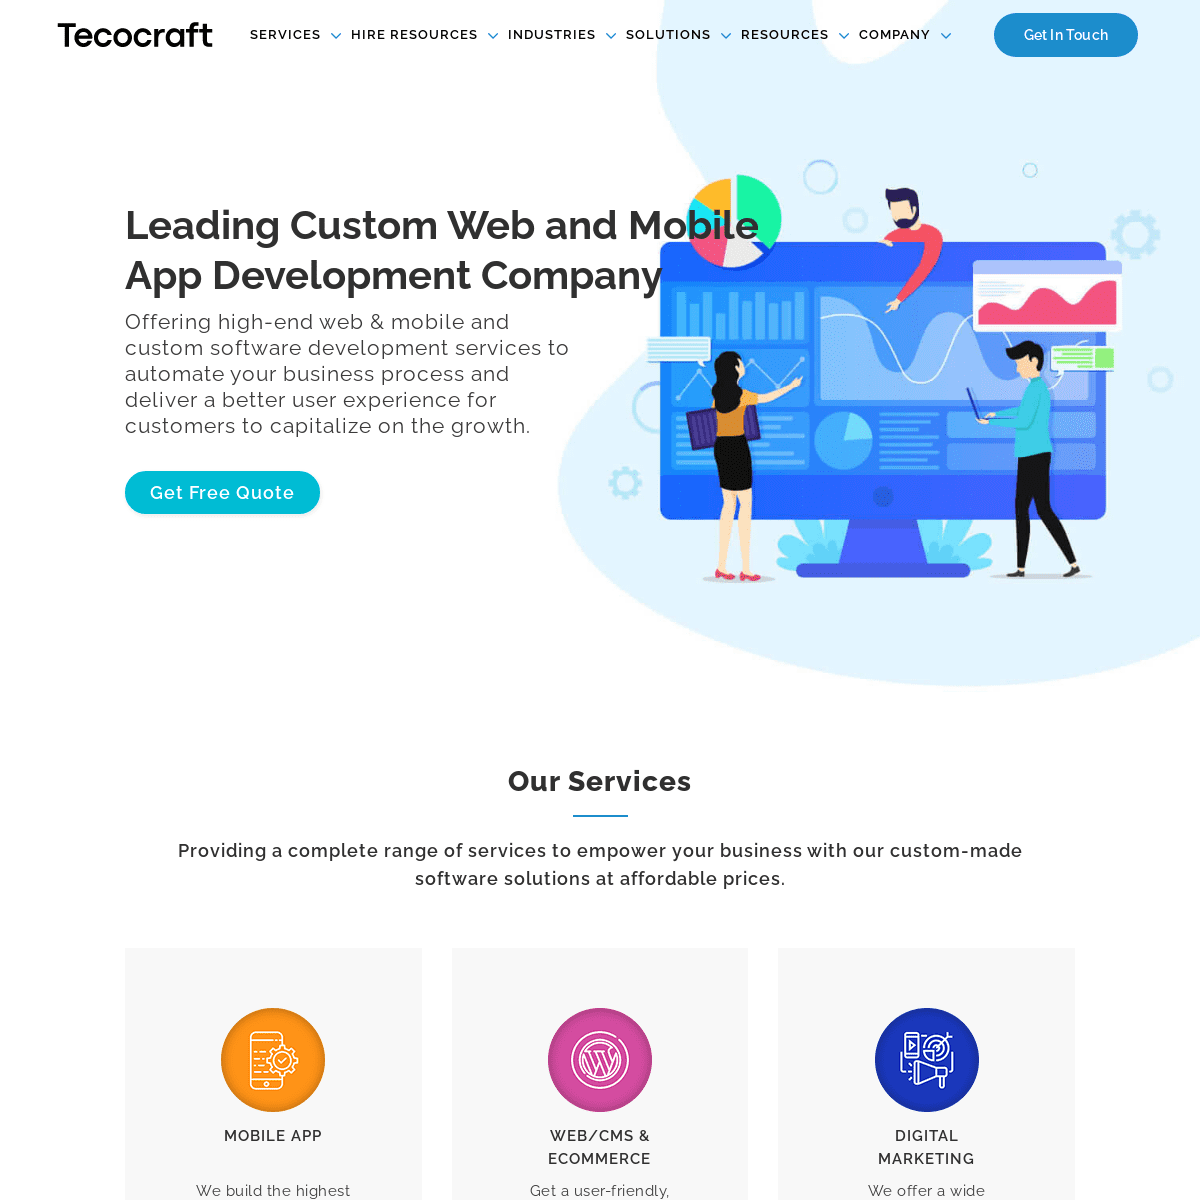 A complete backup of https://tecocraft.com